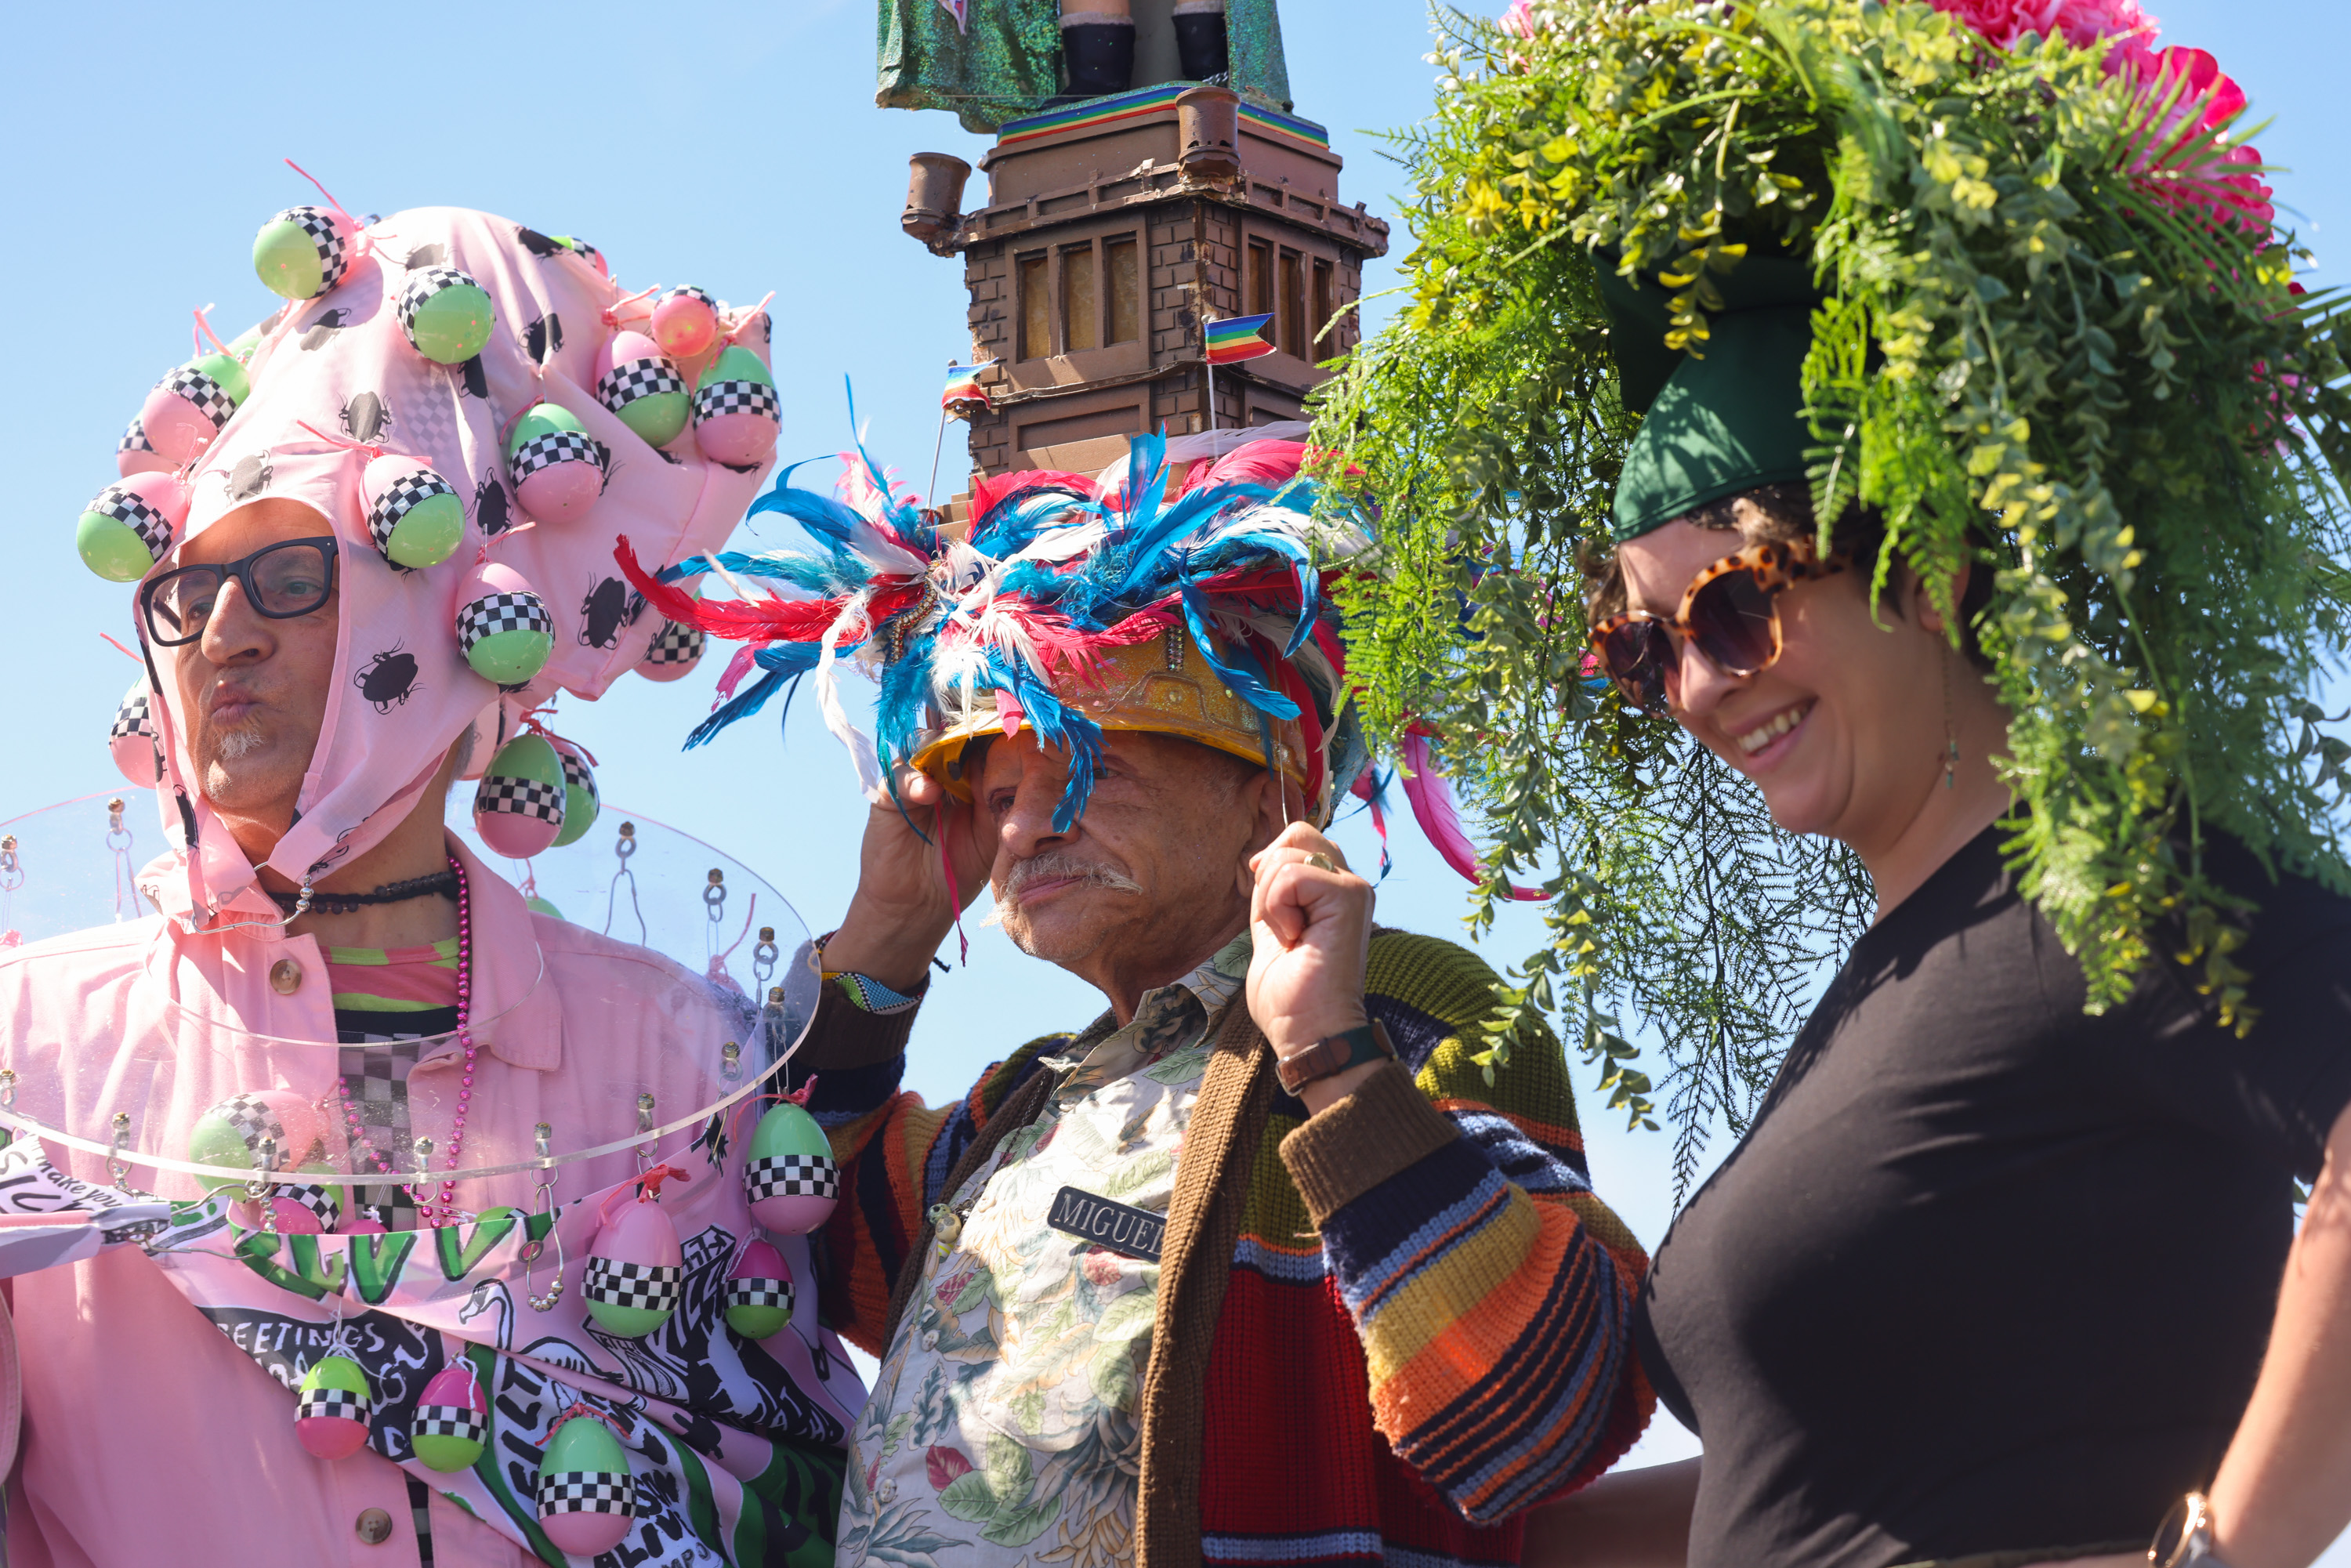 Three people in whimsical costumes with colorful hats, one resembling a flower arrangement, at a bright outdoor event.